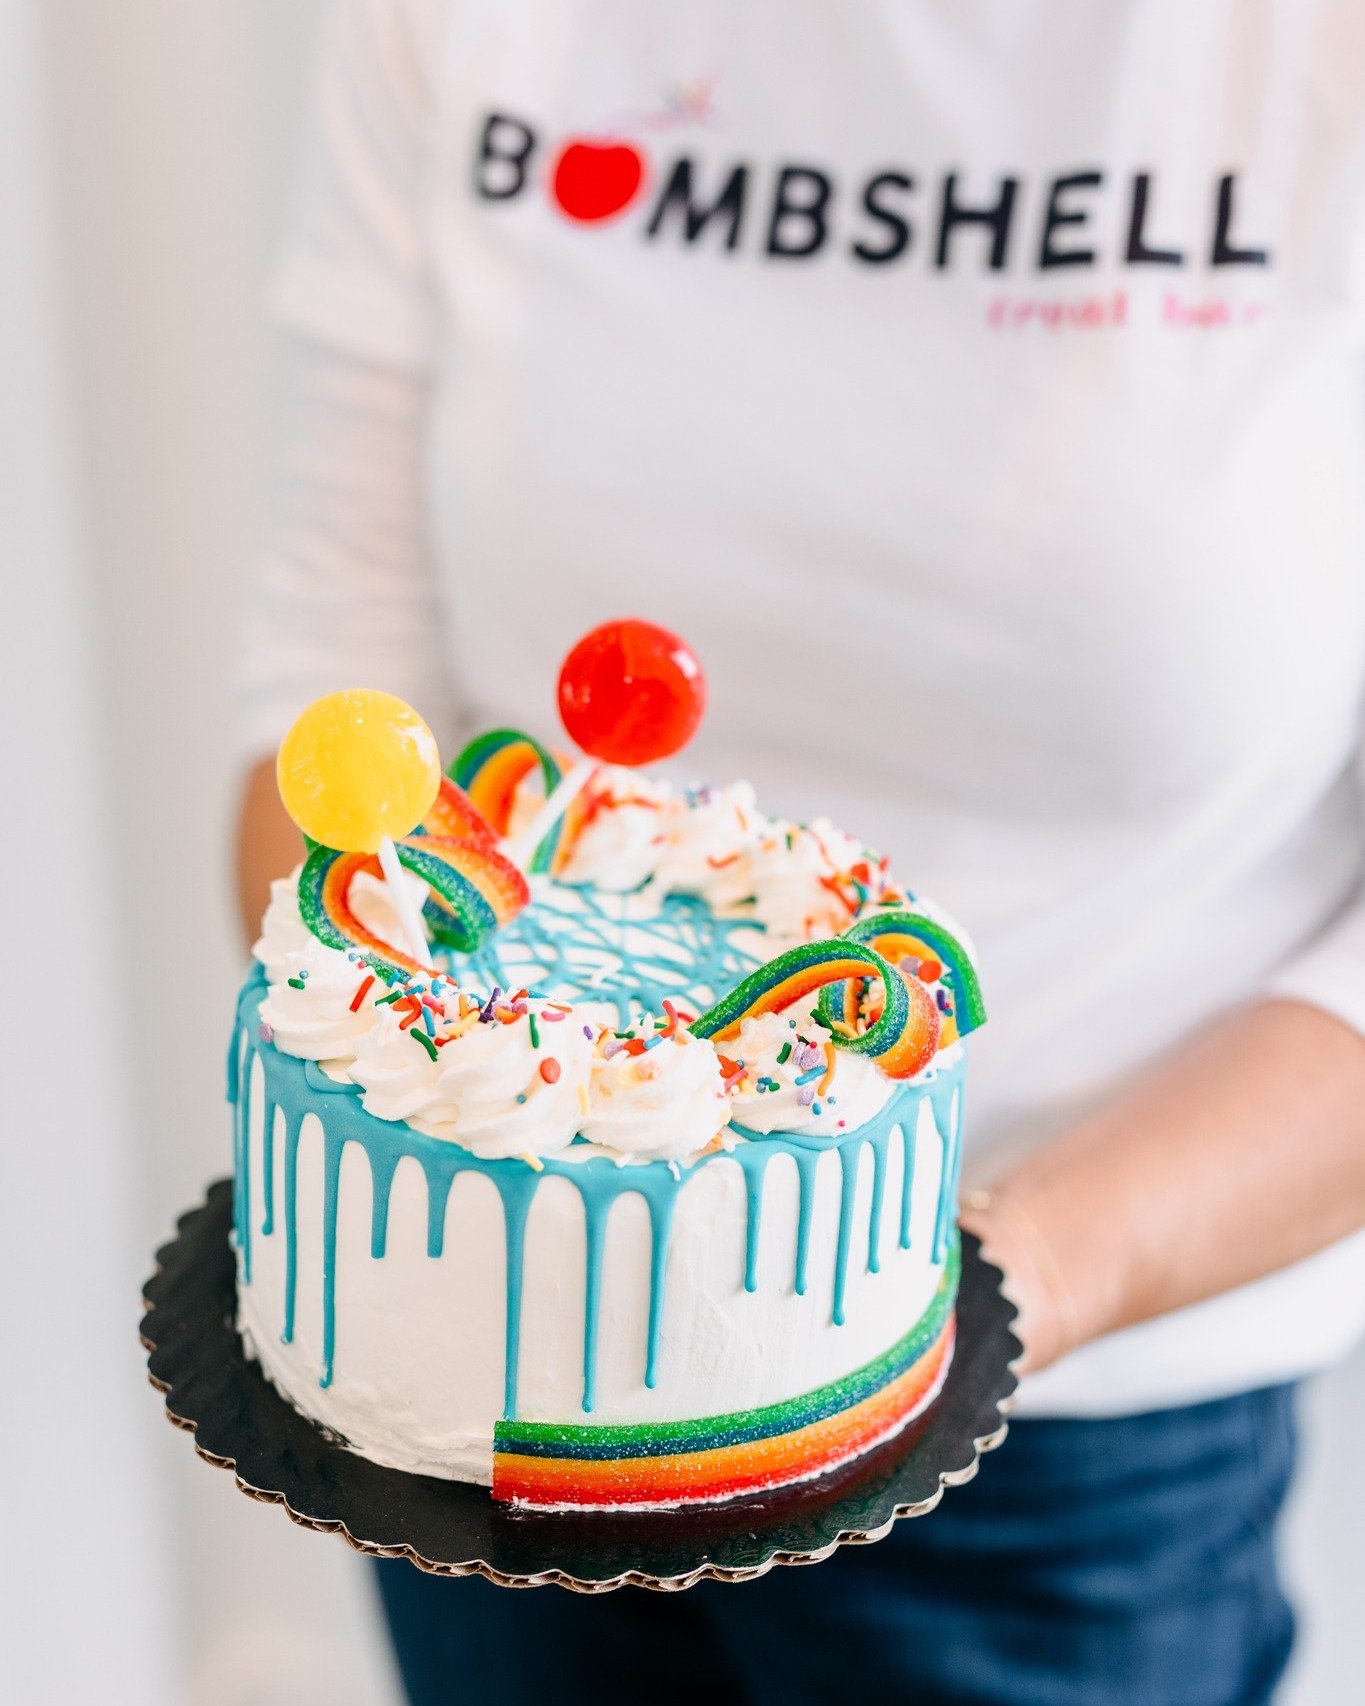 Re-stocked our ice cream cakes! 🥳🎂 These beauties are made fresh weekly and are available in our grab-n-go freezer. $45 a pop and feed 4-6!

🎂 Funetti: funfetti ice cream, funfetti cake, raspberry sauce, whipped topping, blue raspberry chocolate 
